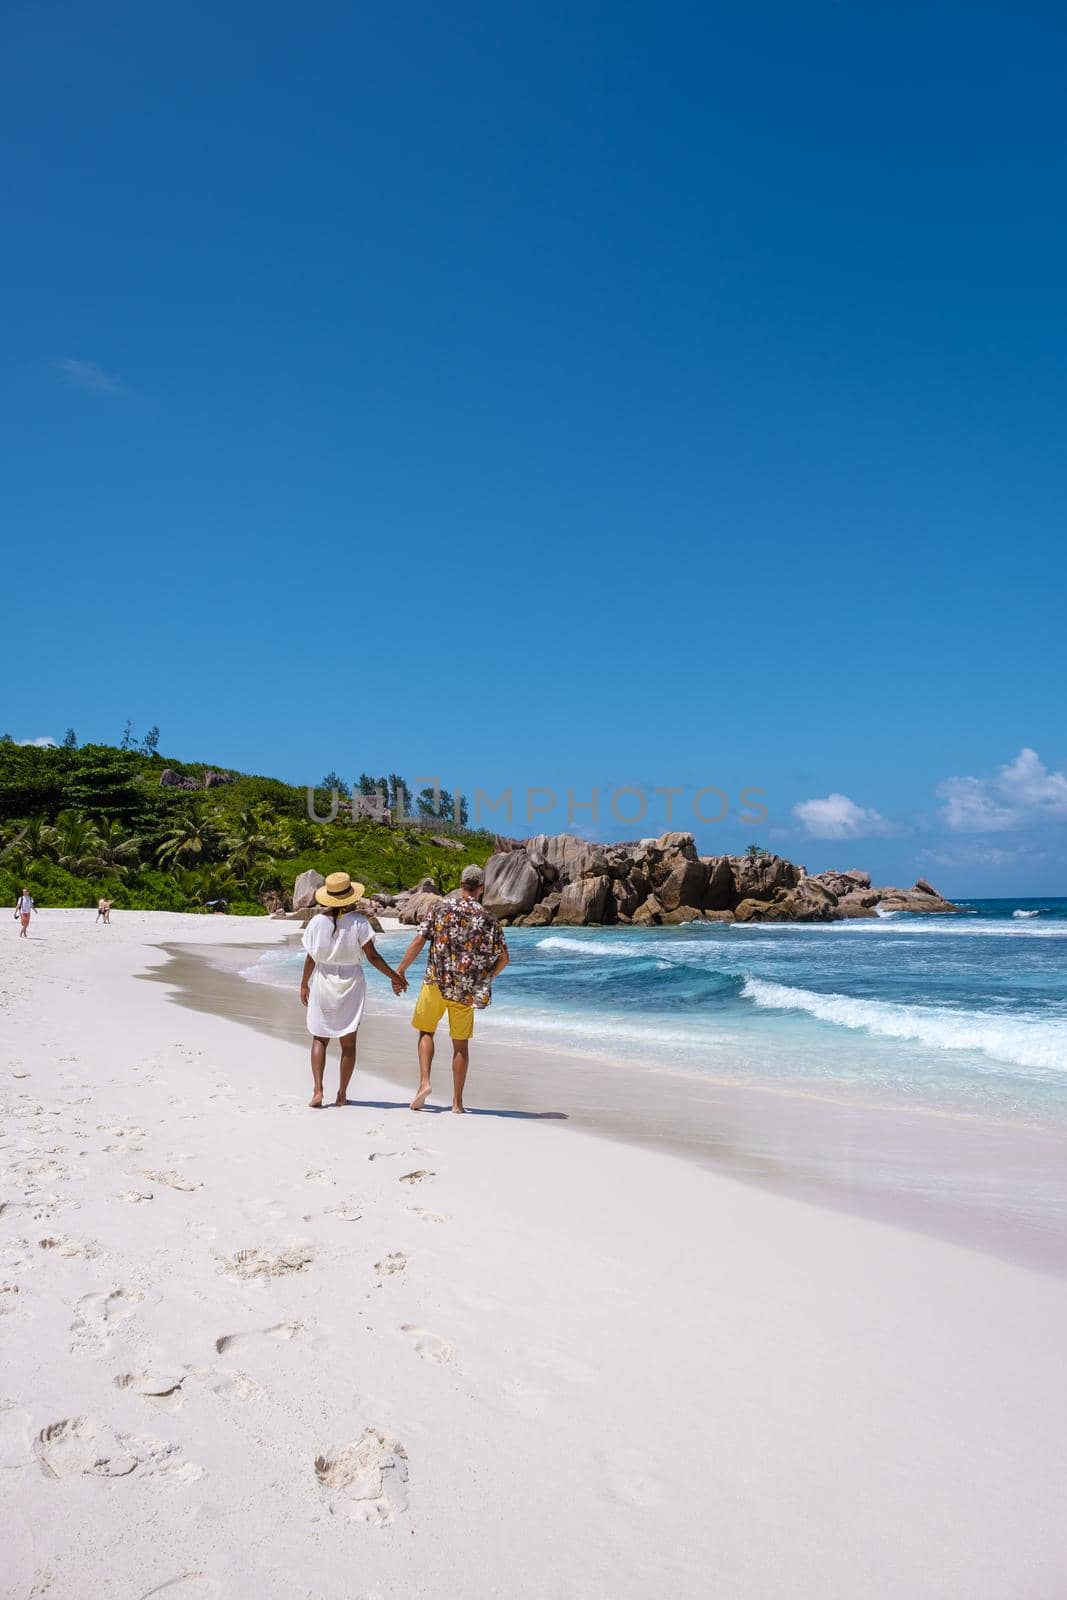 Anse Cocos La Digue Seychelles, a young couple of men and women on a tropical beach during a luxury vacation in Seychelles. Tropical beach Anse Cocos La Digue Seychelles.